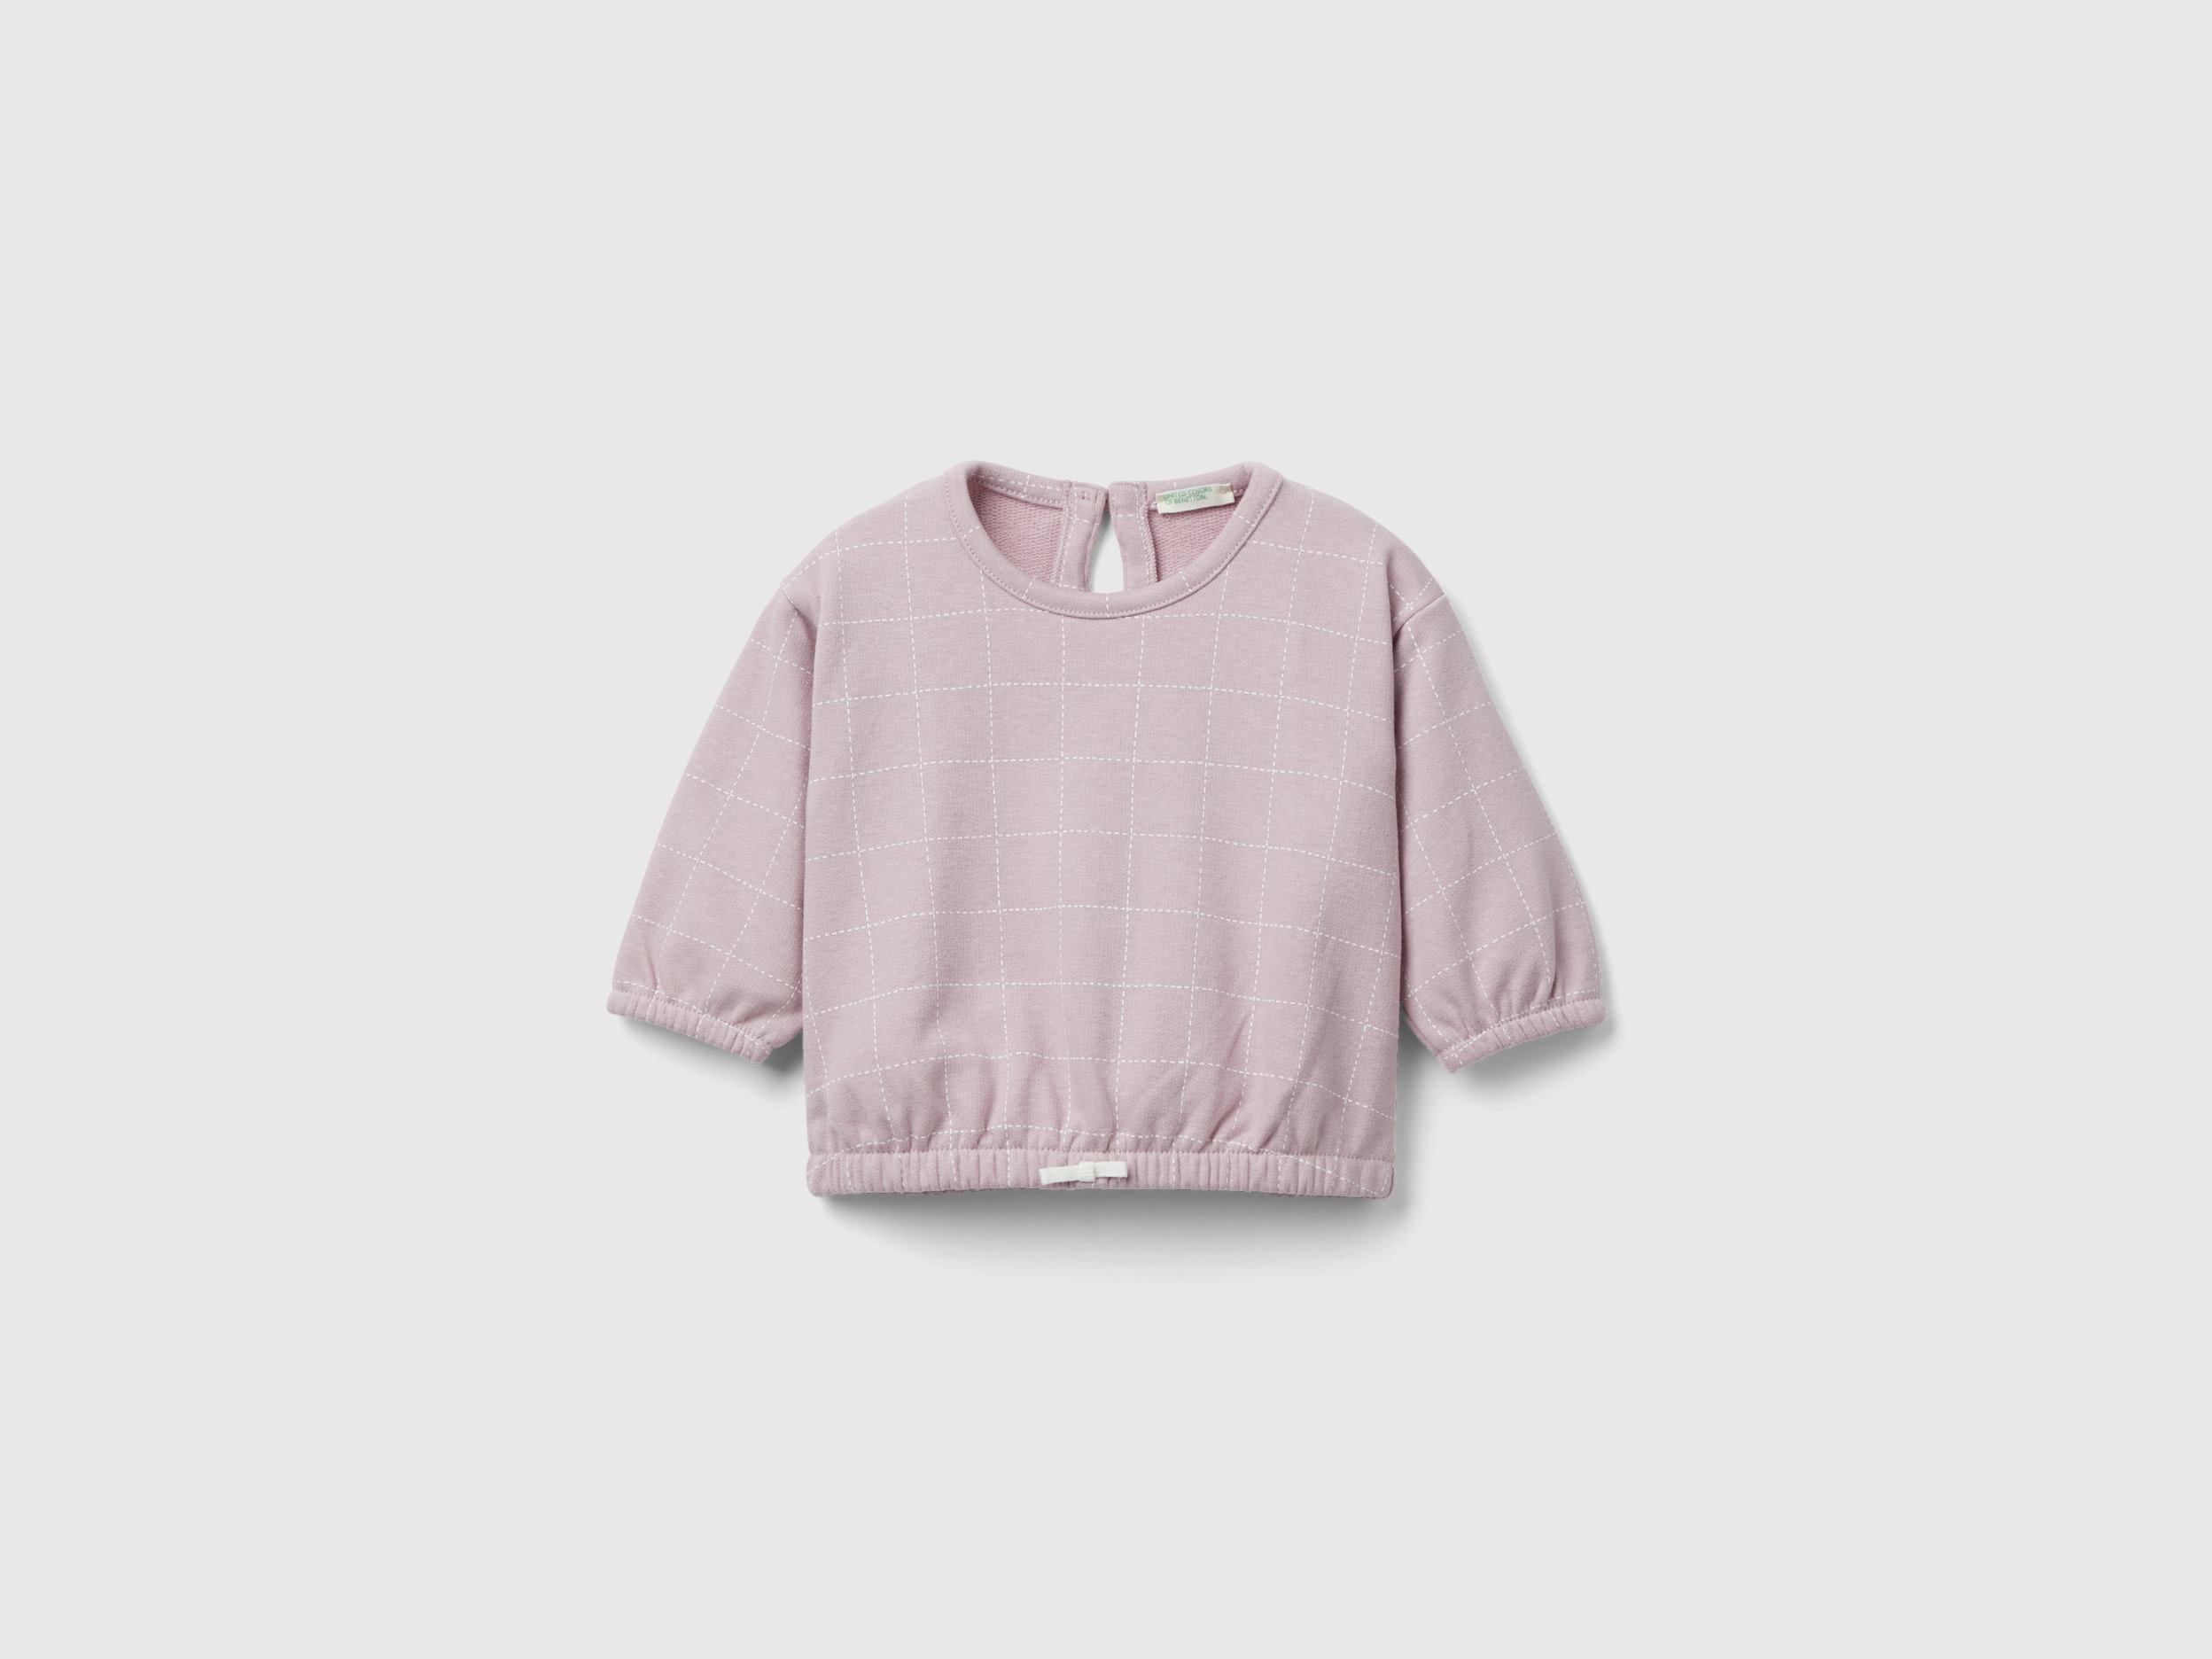 Benetton, Check Sweatshirt With Bow, size 0-1, Pink, Kids